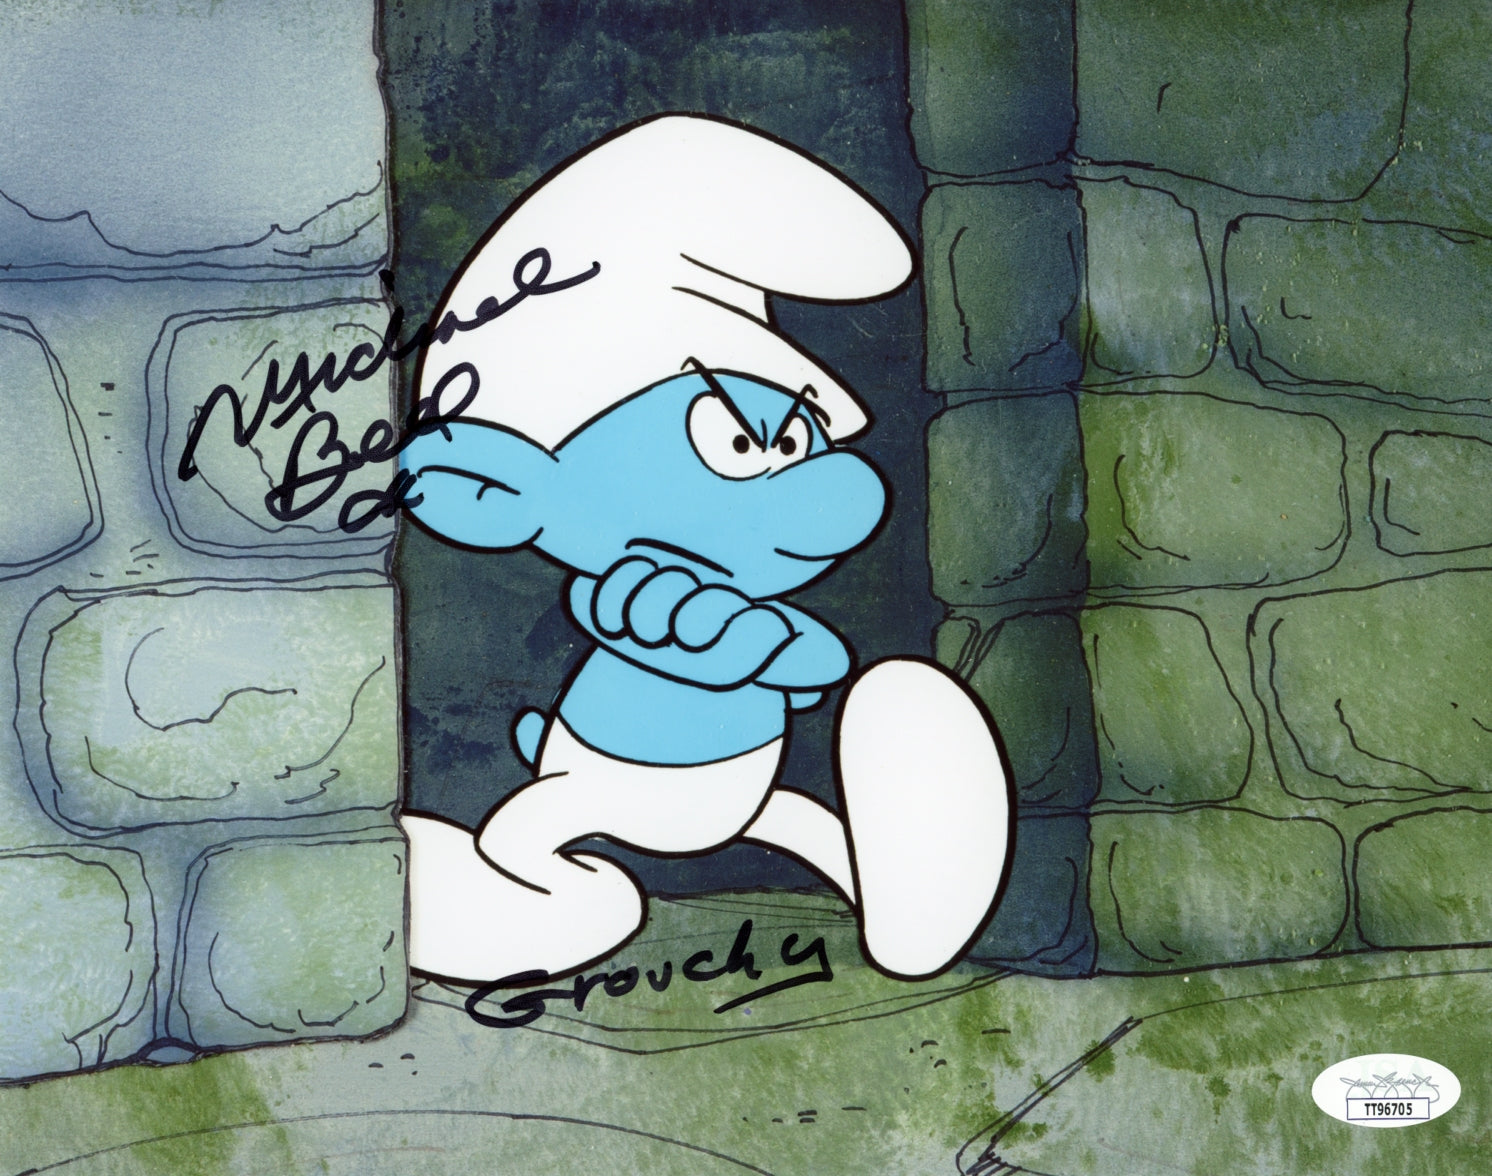 Michael Bell The Smurfs 8x10 Signed Photo JSA COA Certified Autograph